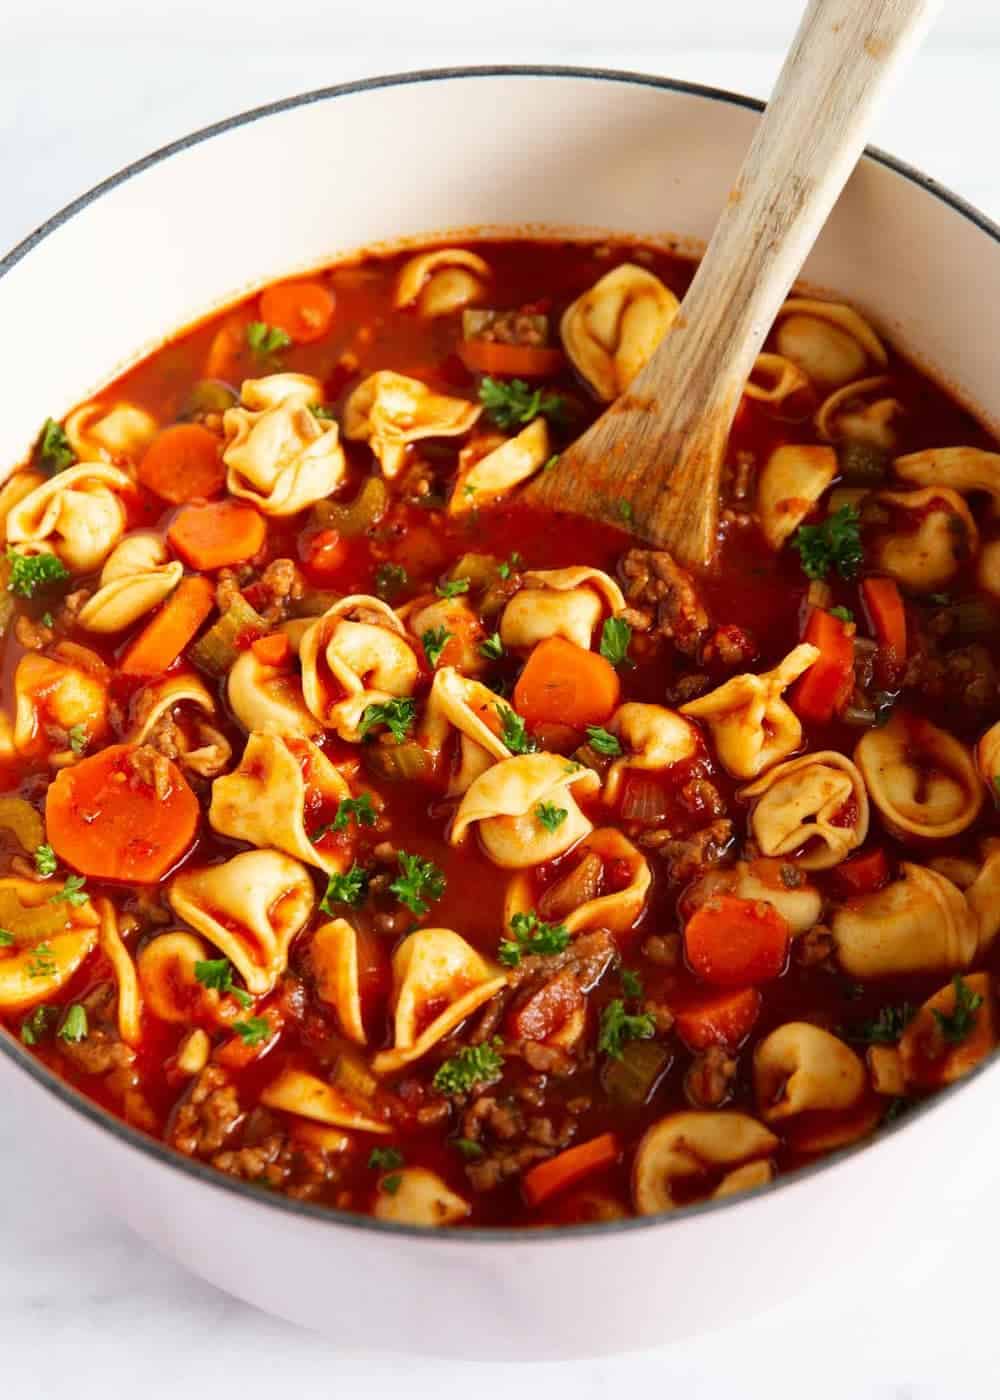 Sausage and tortellini soup in pot with wooden spoon.